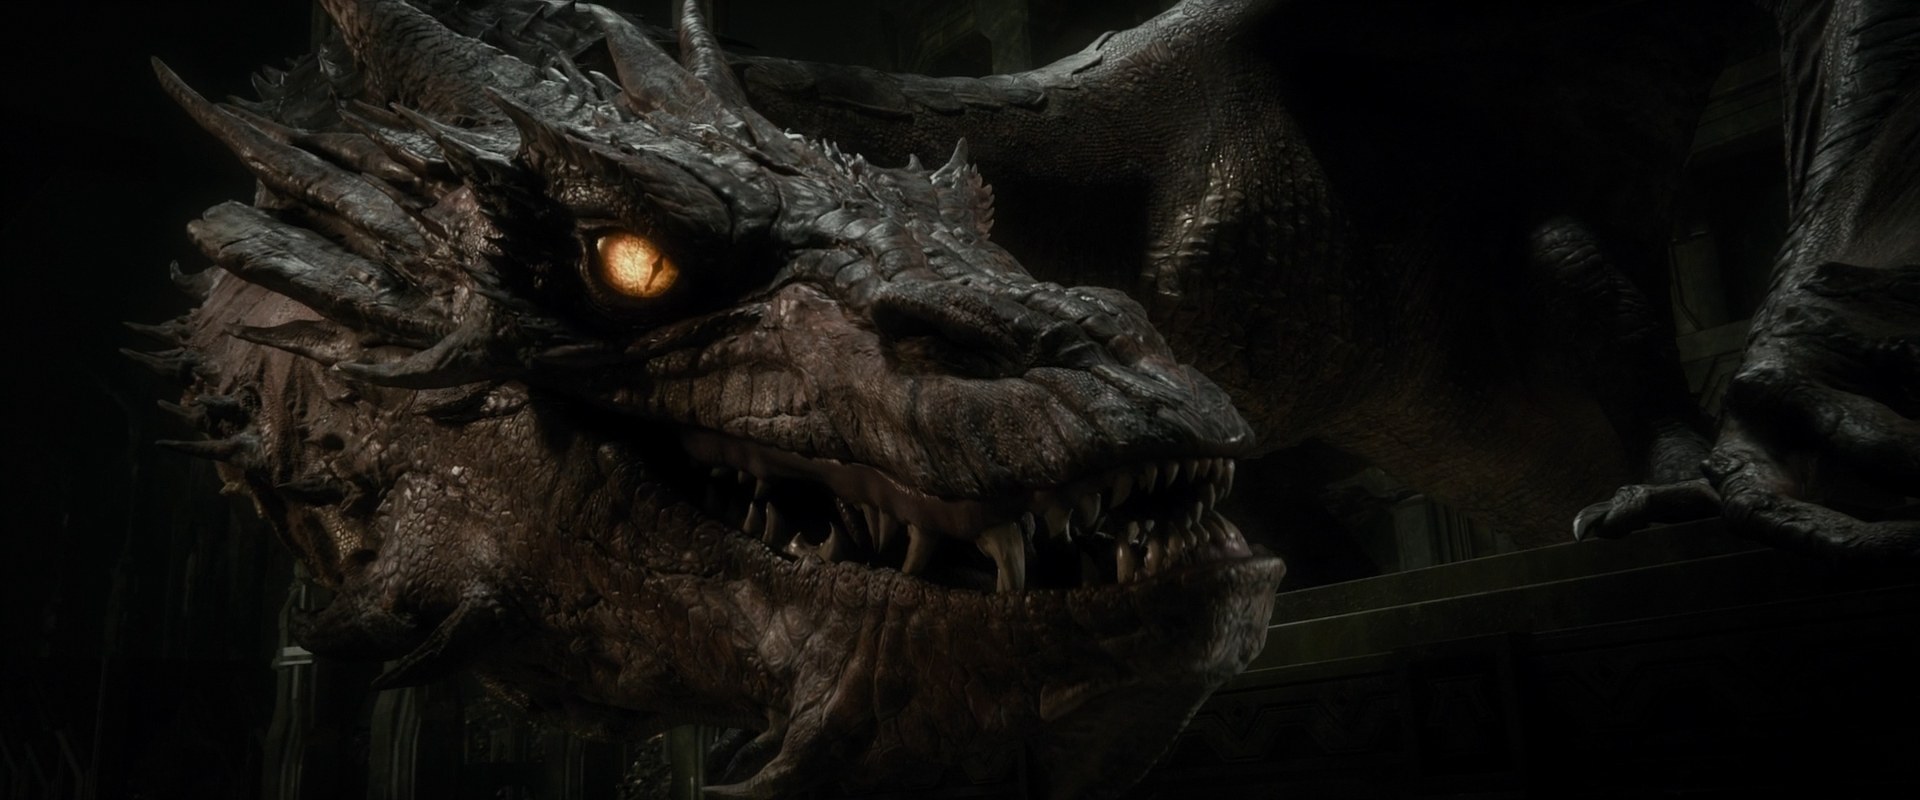 The_hobbit_smaug_04_by_jd1680a-d7c3u4h